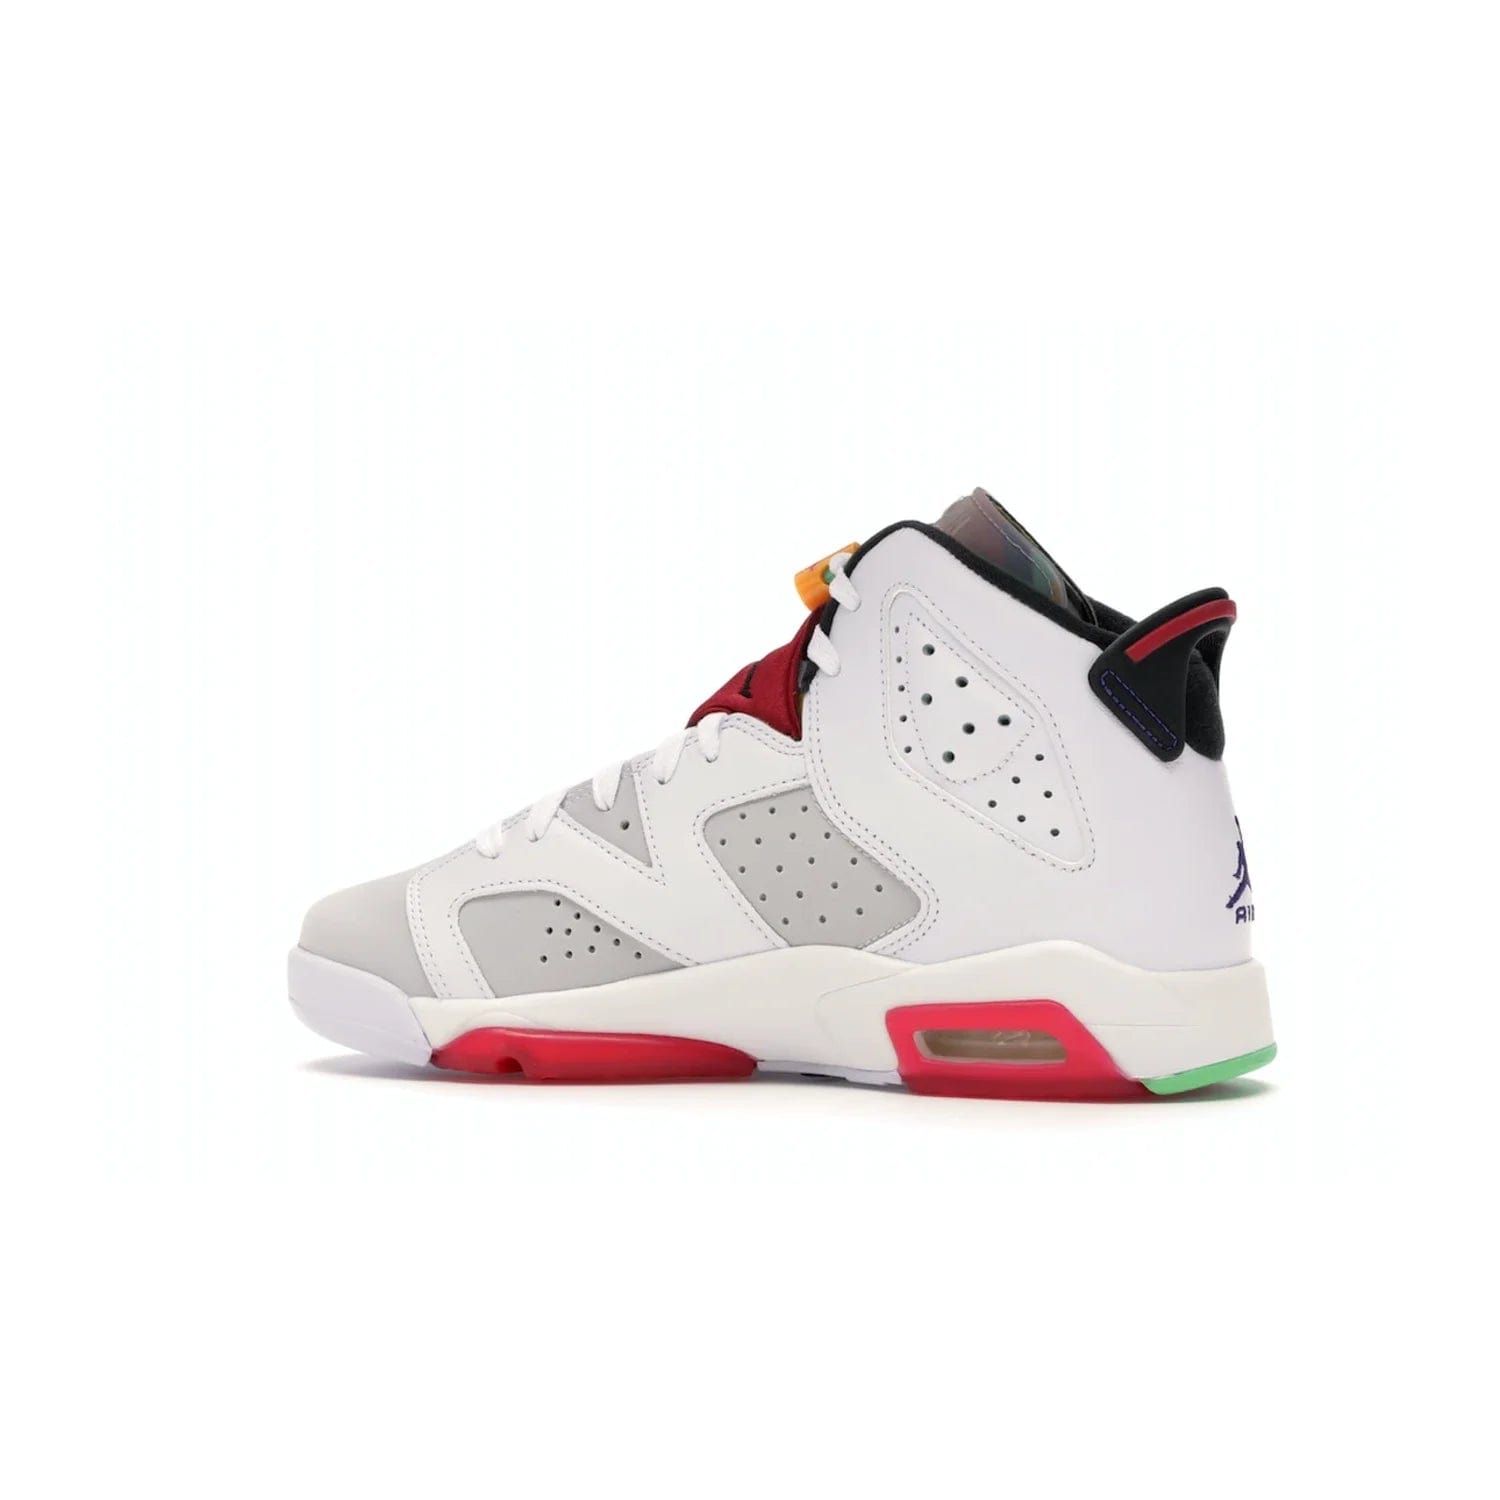 Jordan 6 Retro Hare (GS) - Image 21 - Only at www.BallersClubKickz.com - The Air Jordan 6 Hare GS. Comfortable suede upper, perforations, red pods, two-tone midsole, and signature "Jumpman" emblem. Released 17 June 2020. Perfect for any sneakerhead.